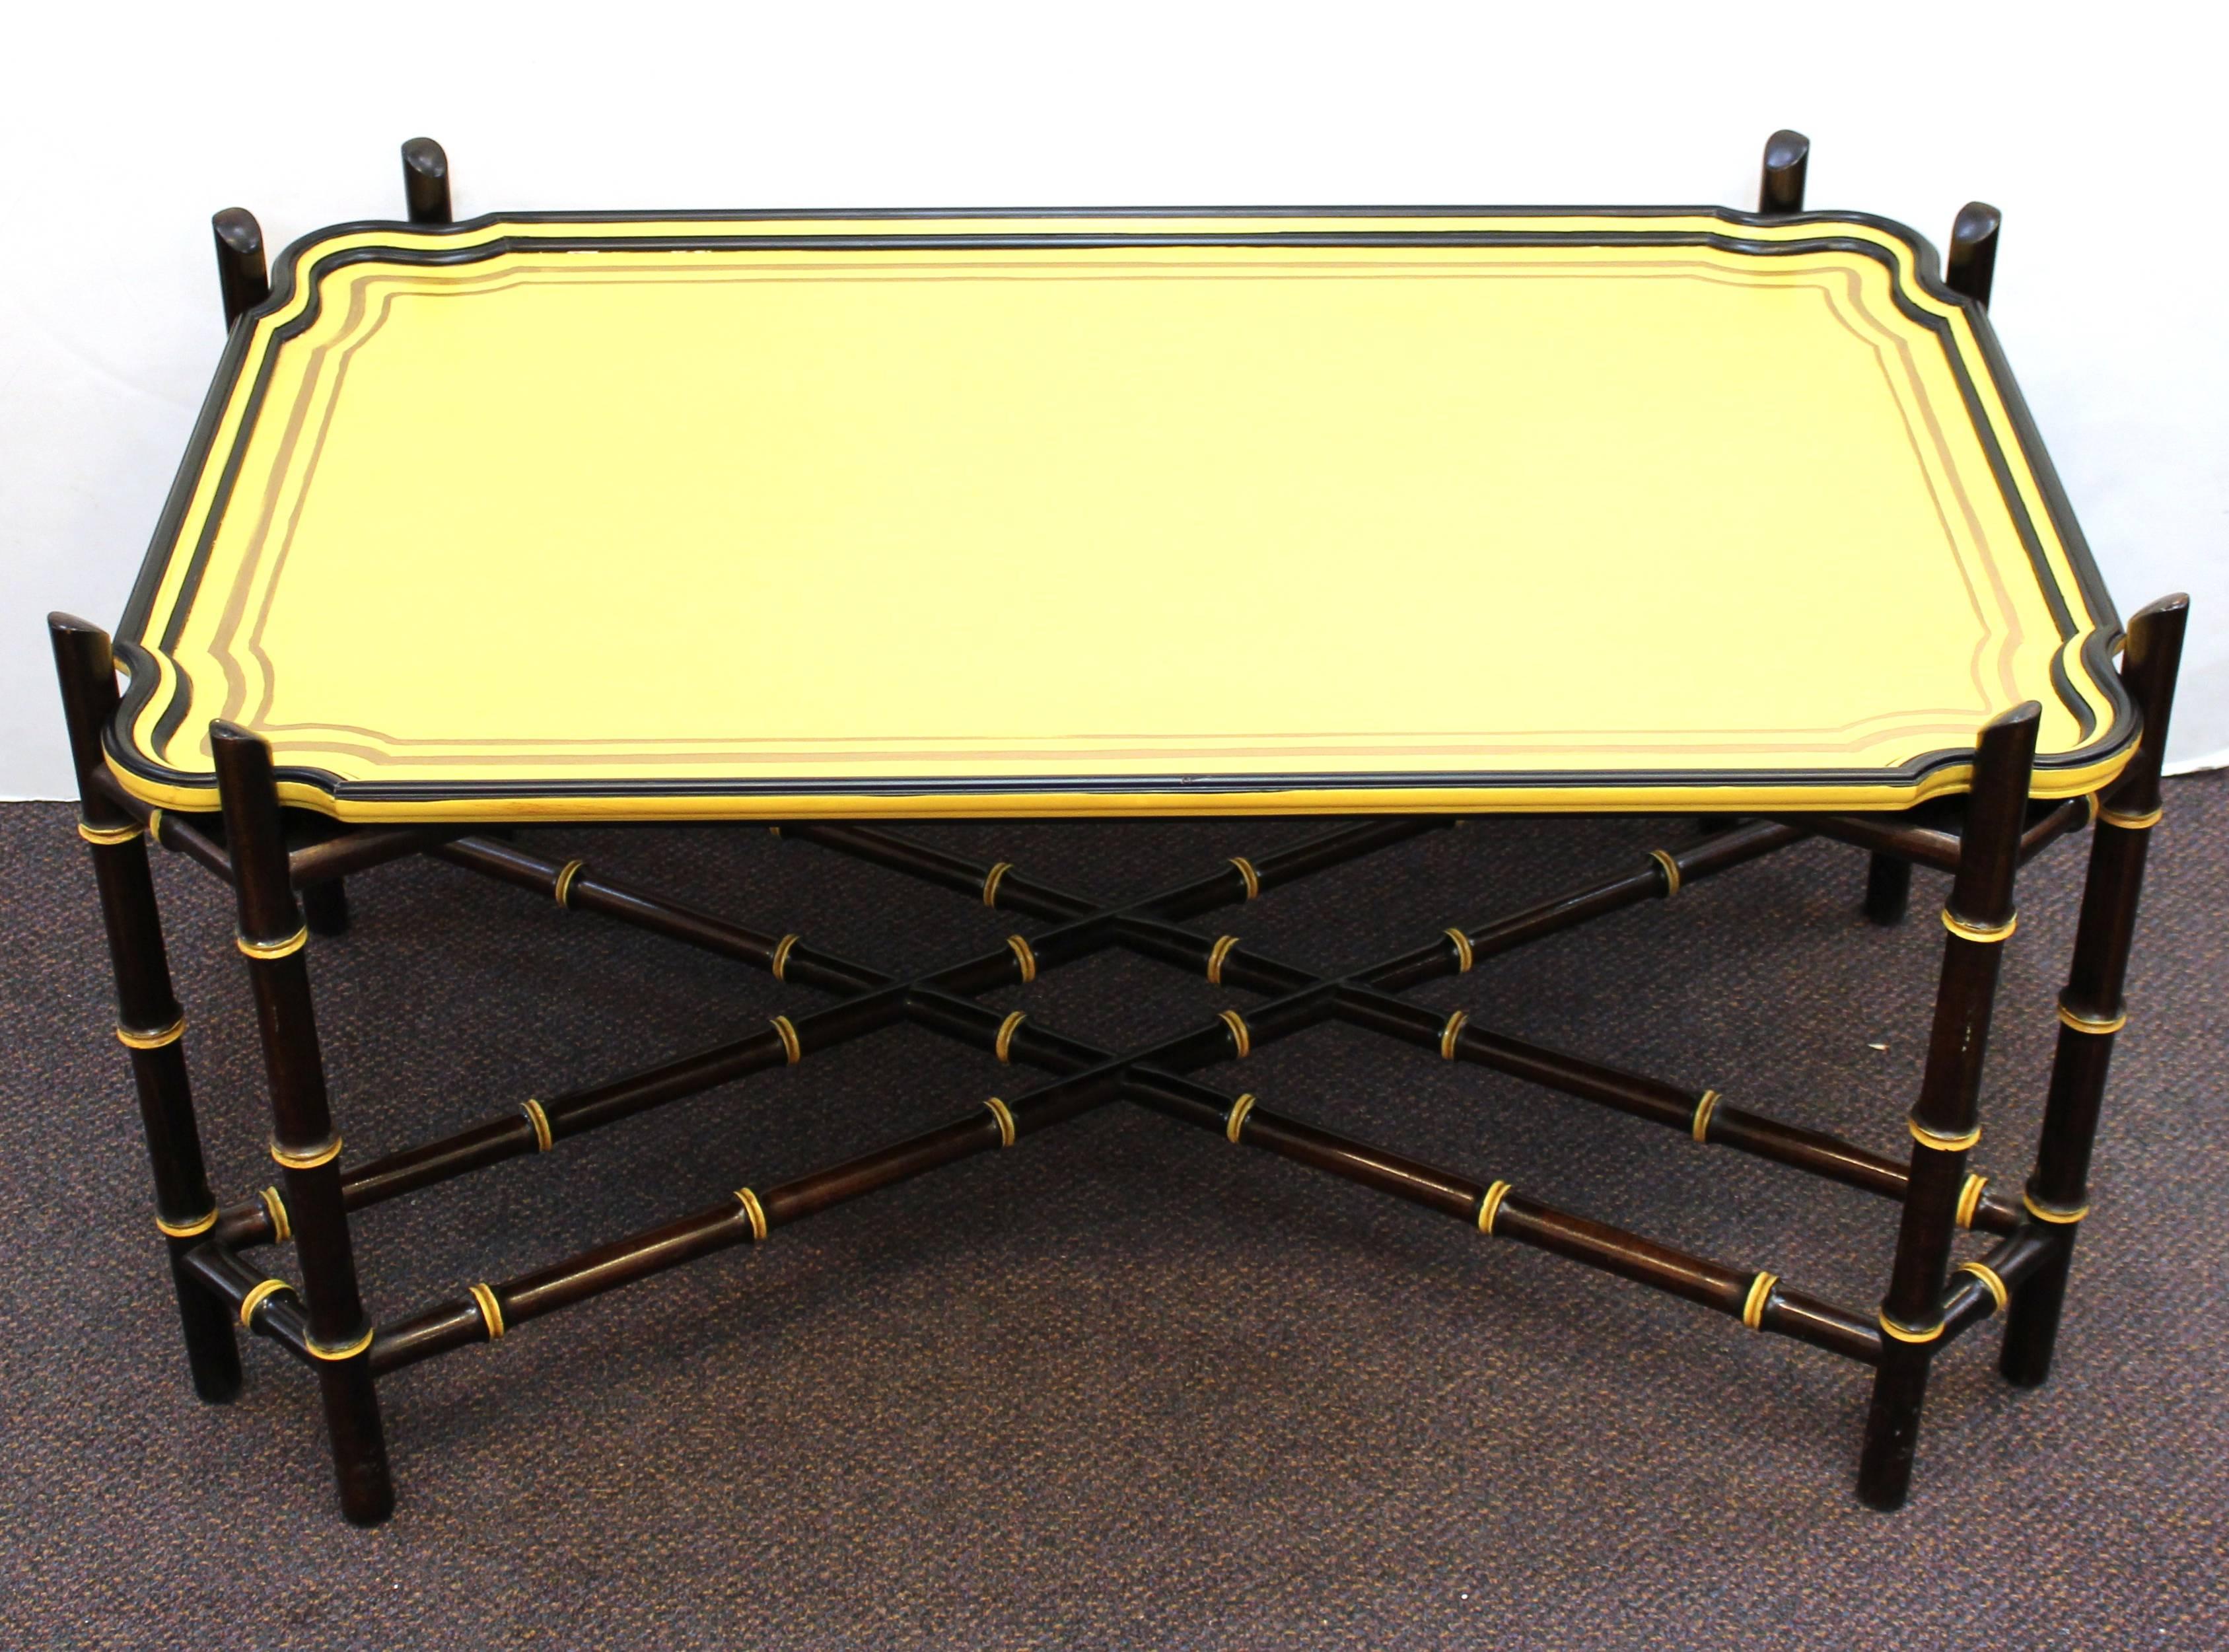 A Baker Furniture Hollywood Regency cocktail or coffee table with a bright yellow tray atop a faux bamboo base. The tray can be removed. In great vintage condition.